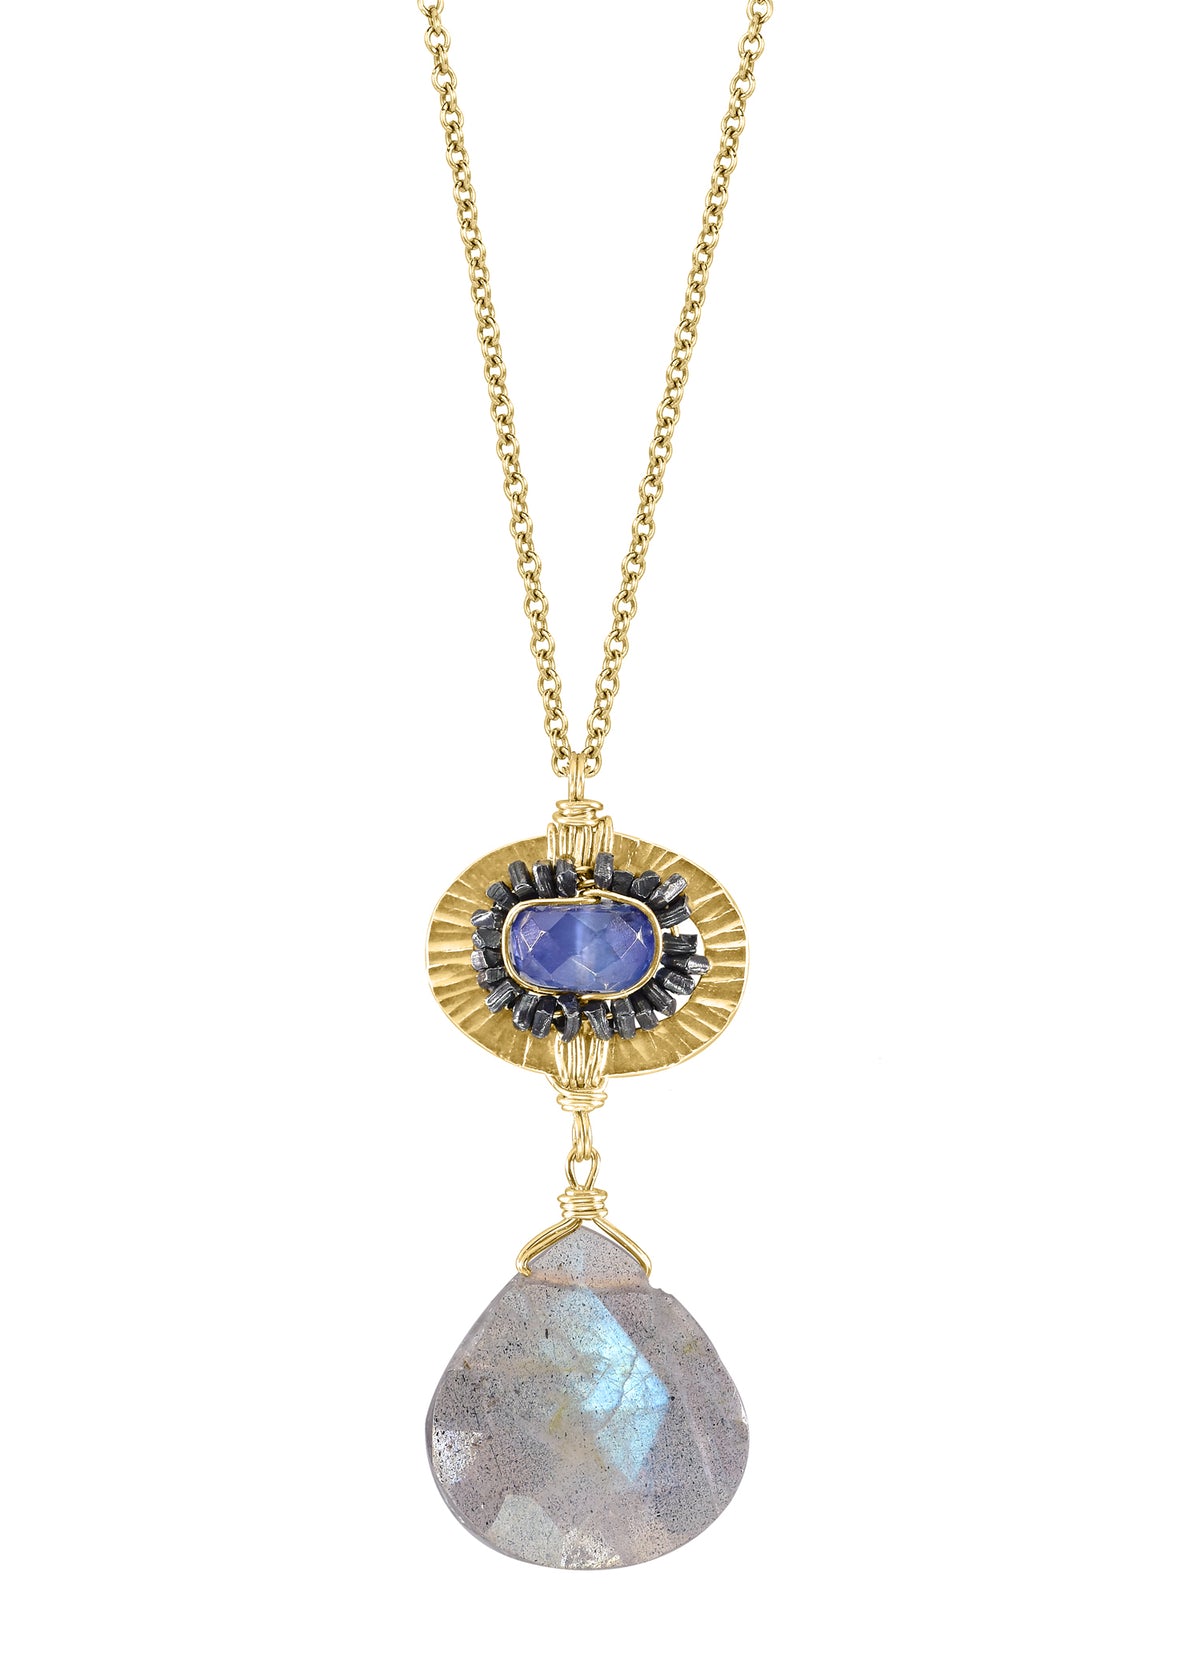 Kyanite Labradorite 14k gold fill Sterling silver Mixed metal Necklace measures 16&quot; in length Pendant measures 1-1/8&quot; in length and 1/2&quot; in width at the widest point Handmade in our Los Angeles studio